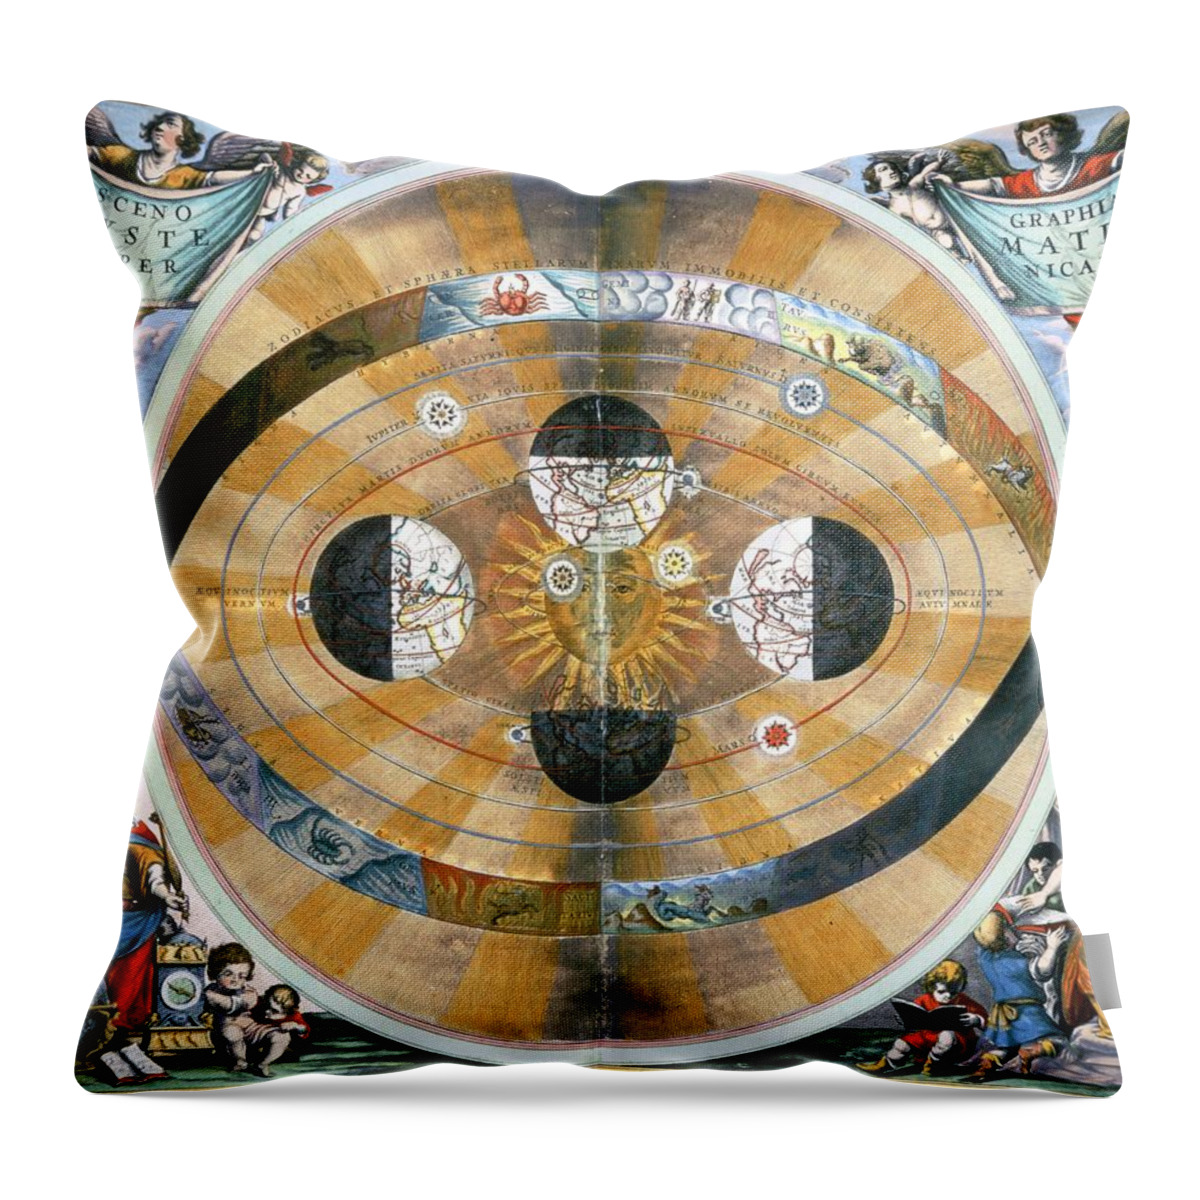 Nicolaus Copernicus Throw Pillow featuring the painting Map of heavens earth showing theory of earth planets and zodiac, c.1543 by Nicholas Copernicus. by Album